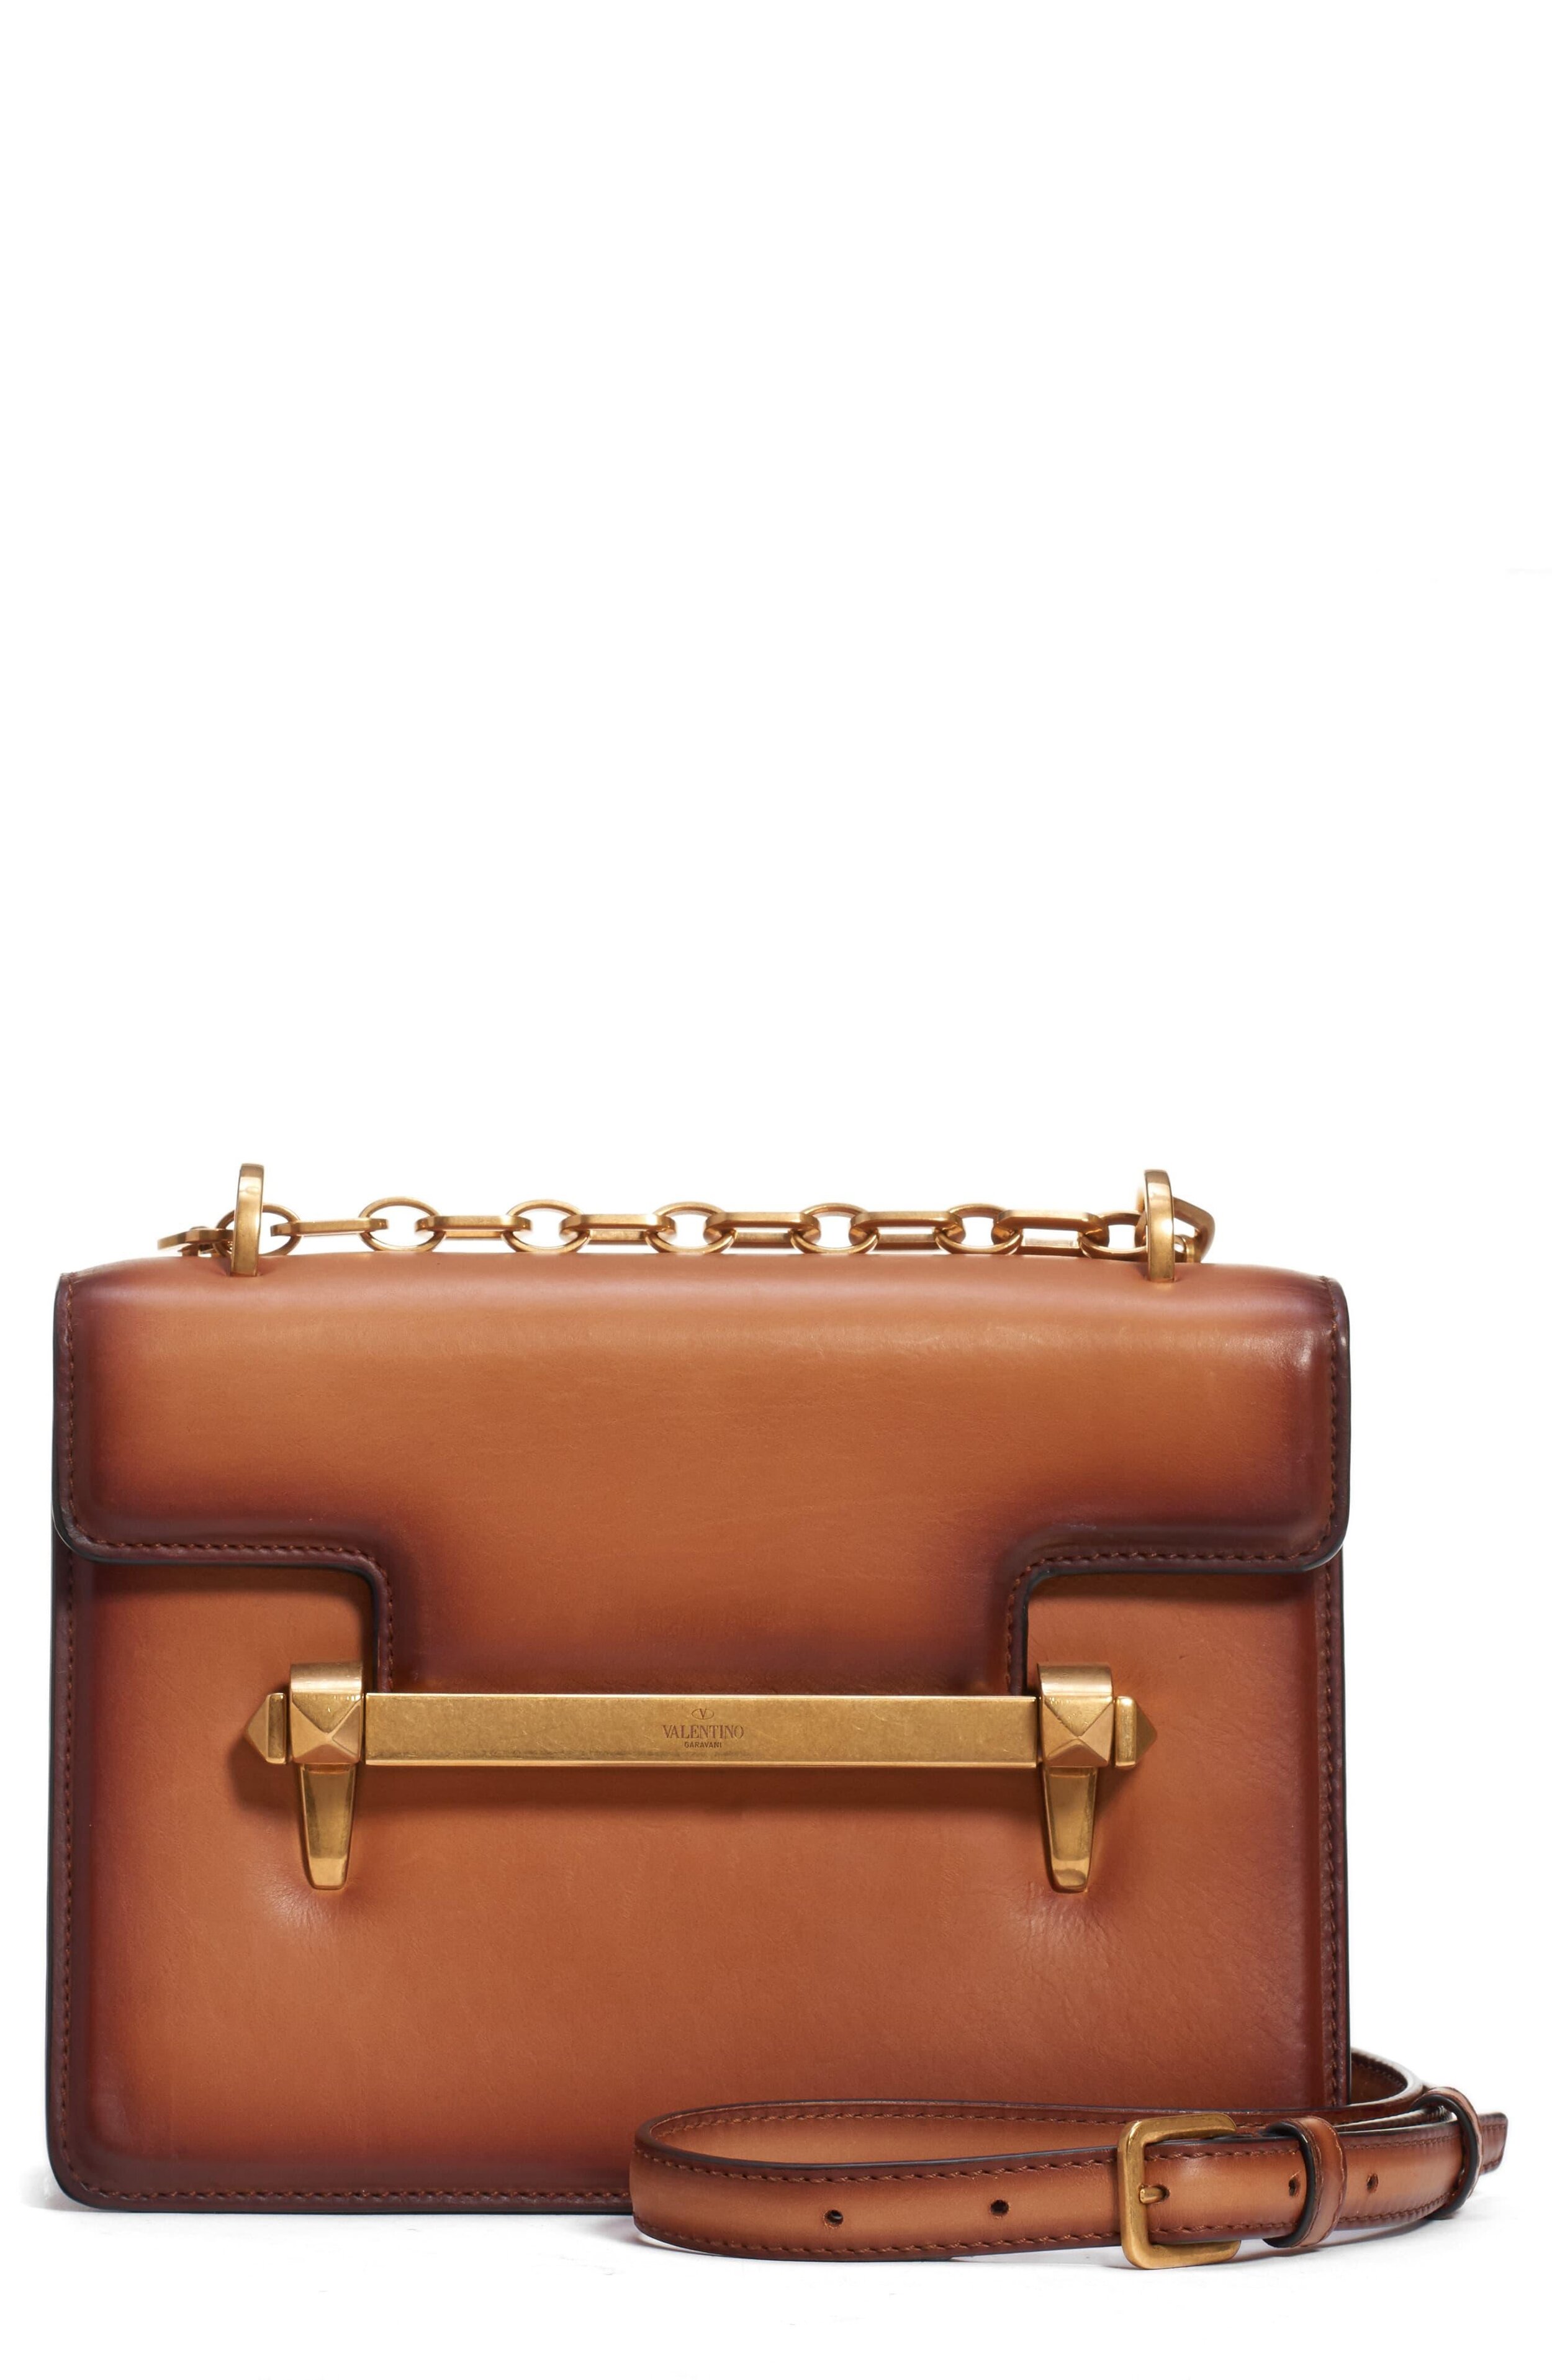 Valentino Small Leather Shoulder Bag in Tan More